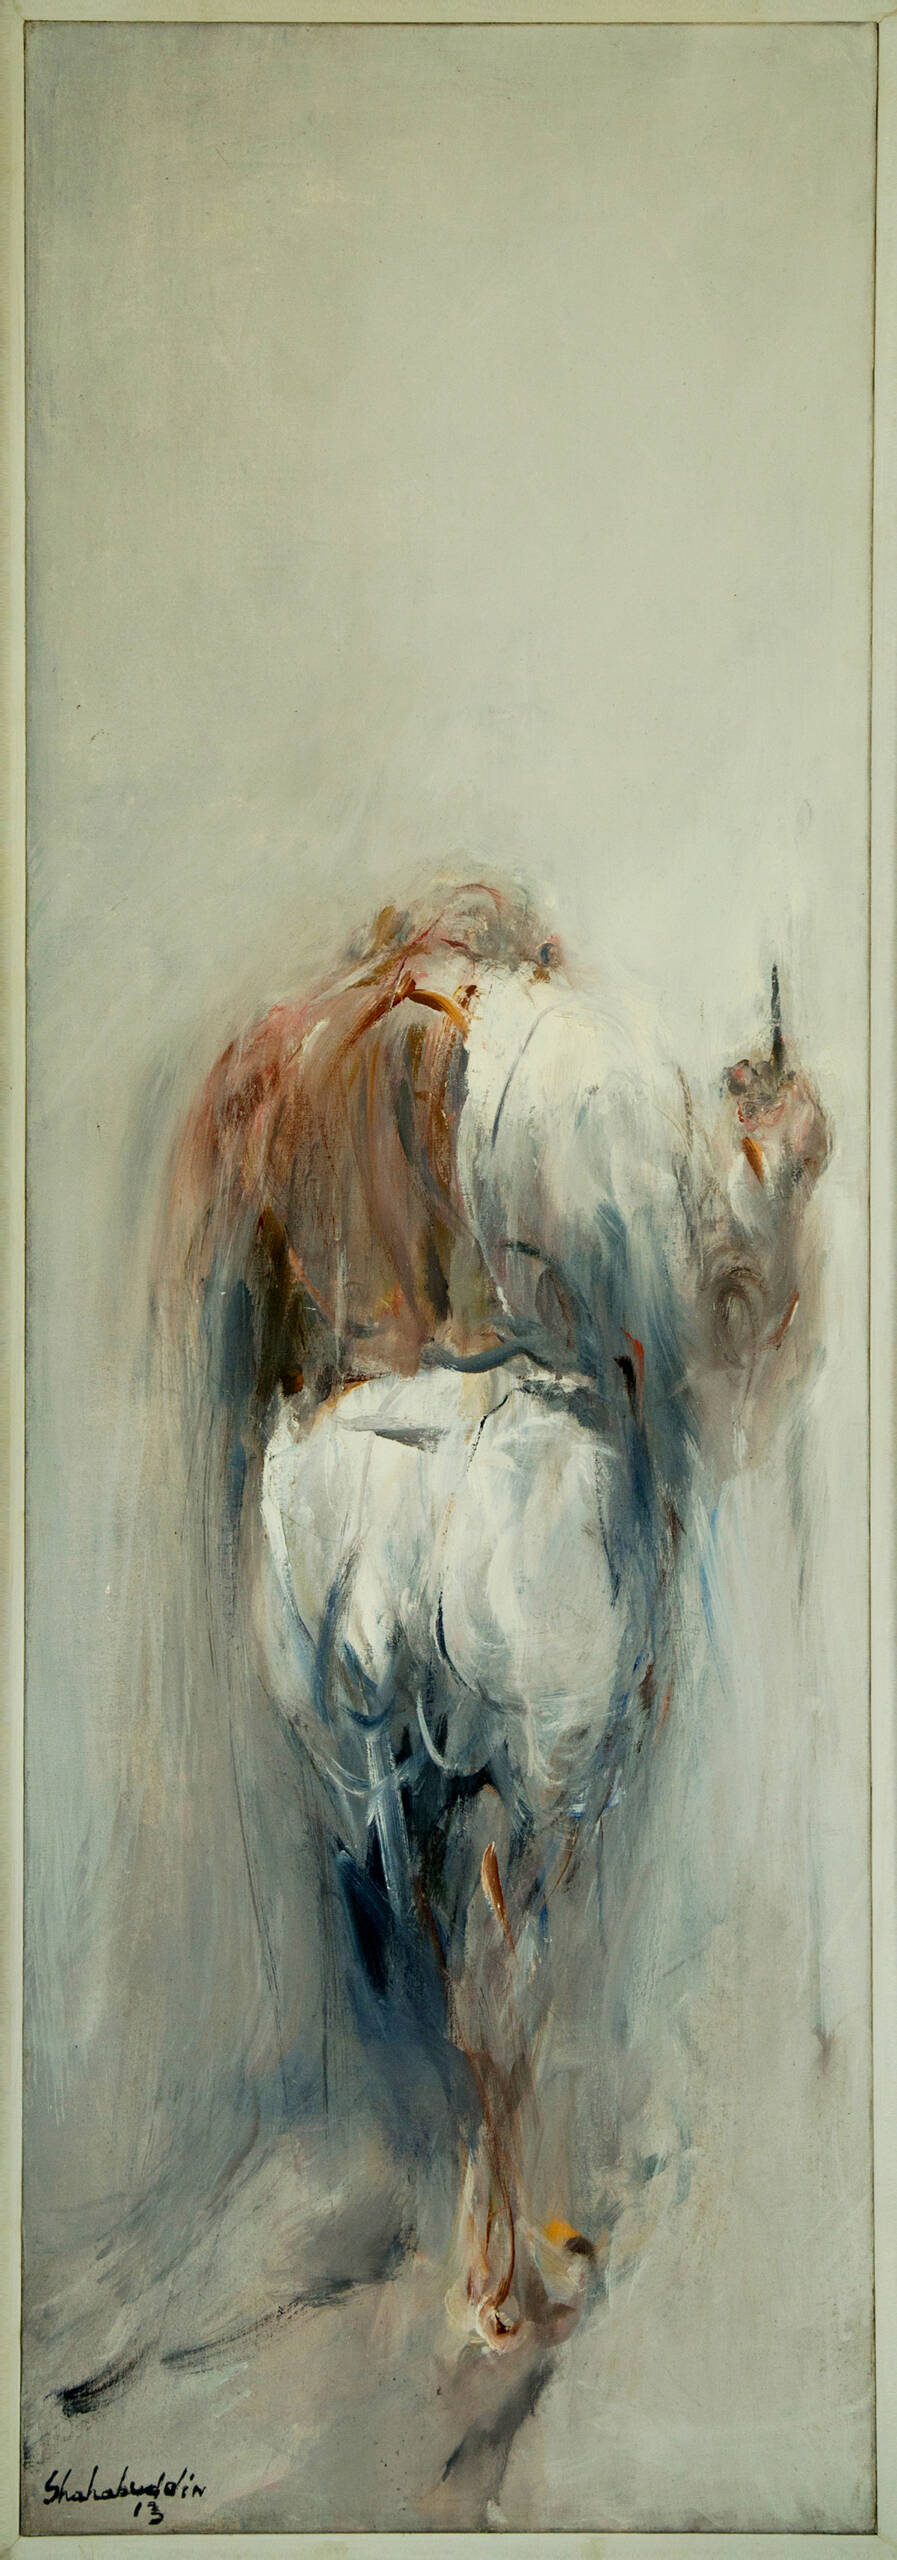 A painting of a blurred figure